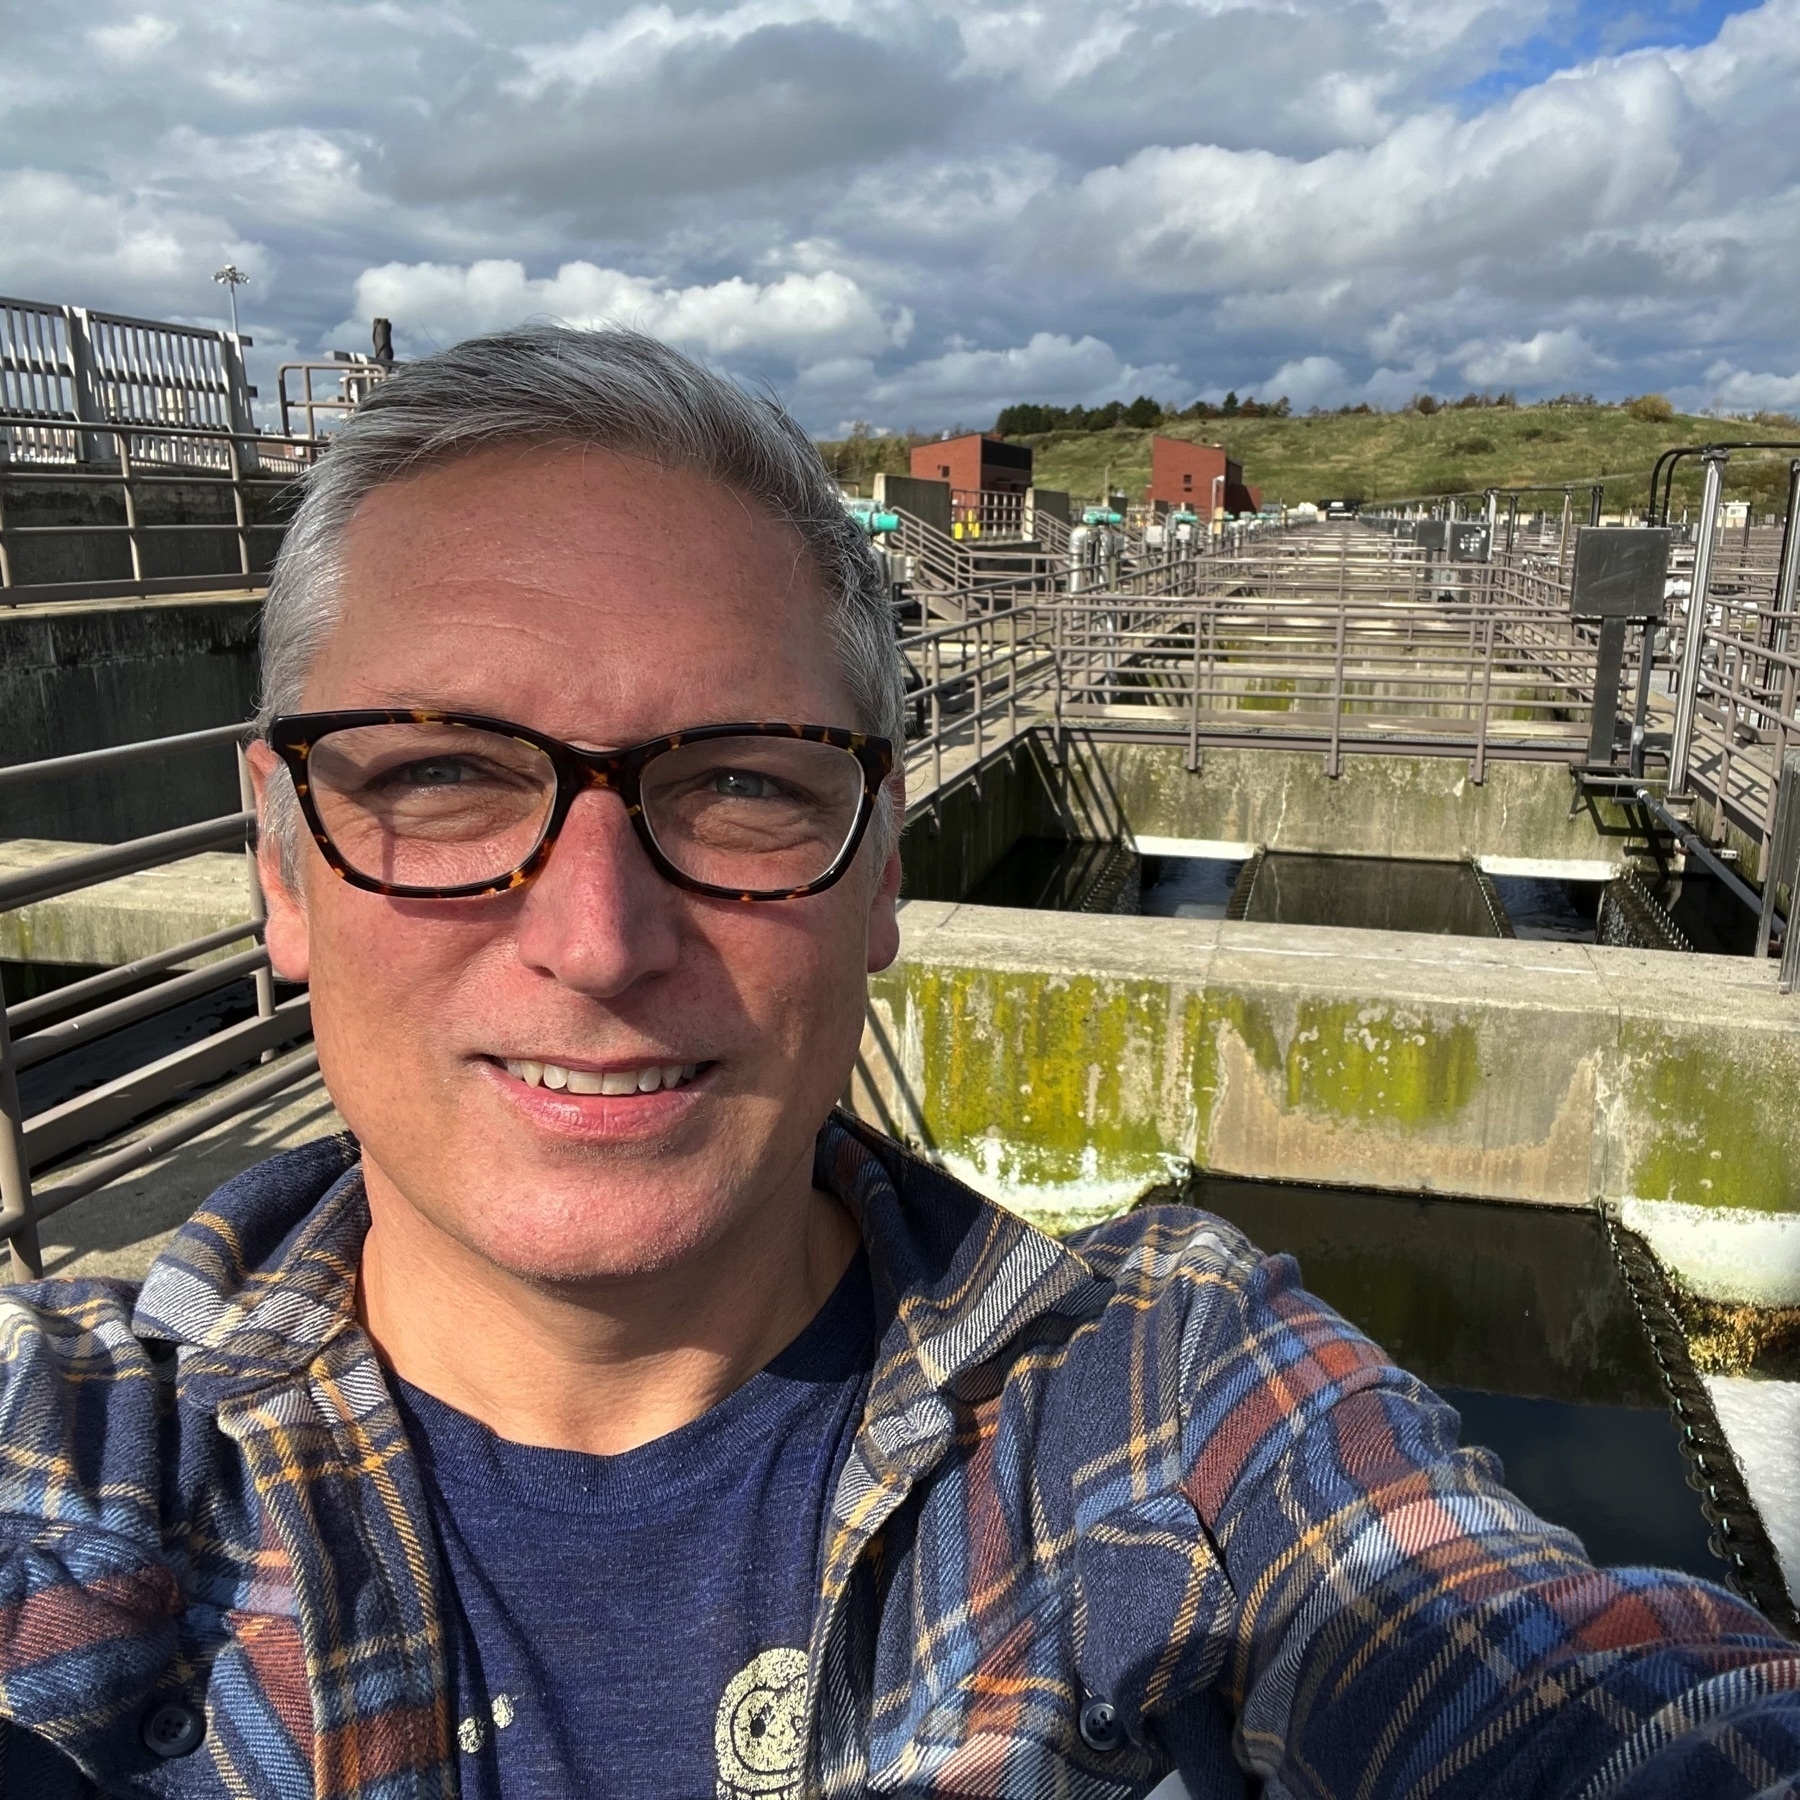 picture of myself squinting into the sun, with grey hear, reddish skin, and a blue plaid shirt. expansive water treatment structures behind me.